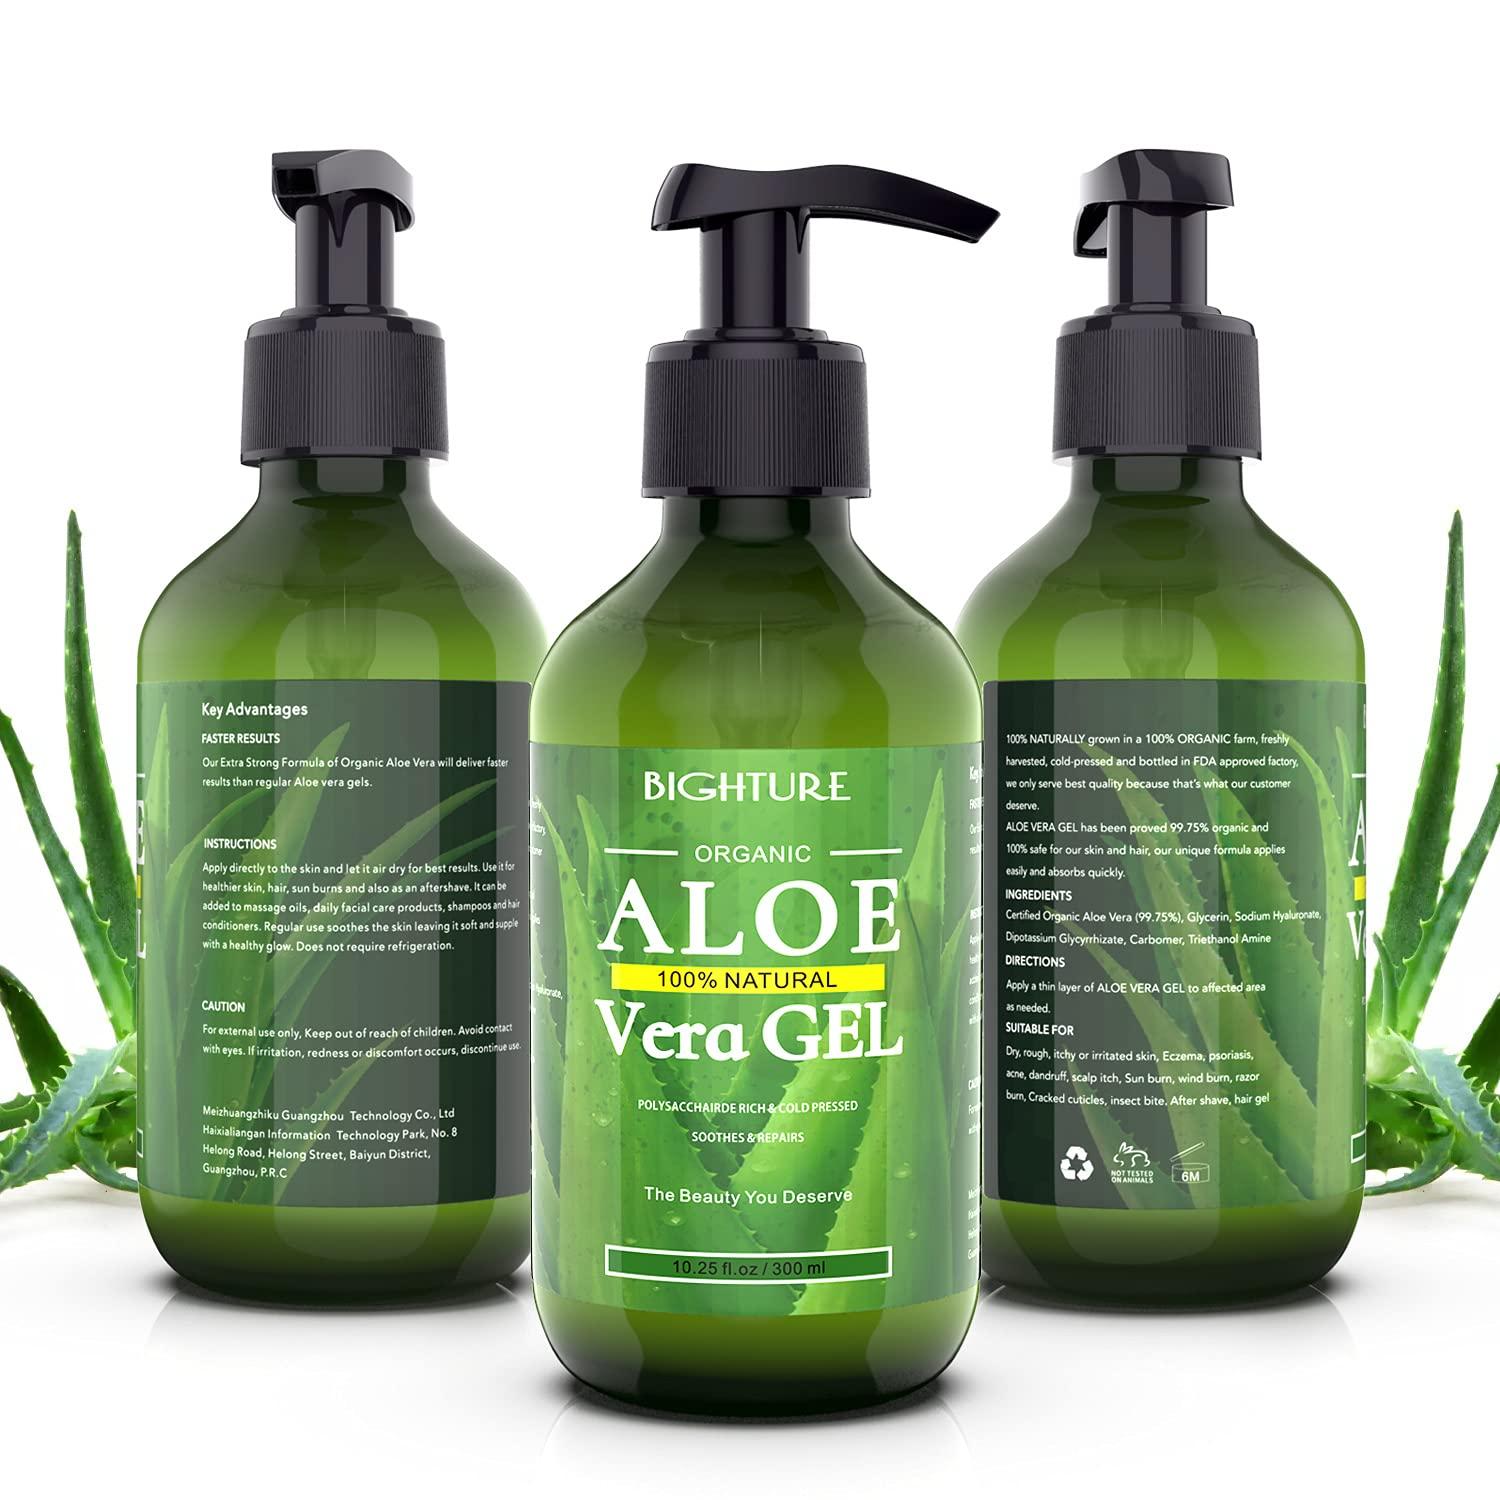 Bighture Aloe Vera Gel, 100% Aloe Vera Organic from Freshly Cut Aloe  Leaves, Skin Care for Deeply & Rapidly Soothing, Firming, After Shave,  Sunburn Relieve, etc  Fl Oz (Pack of 1)